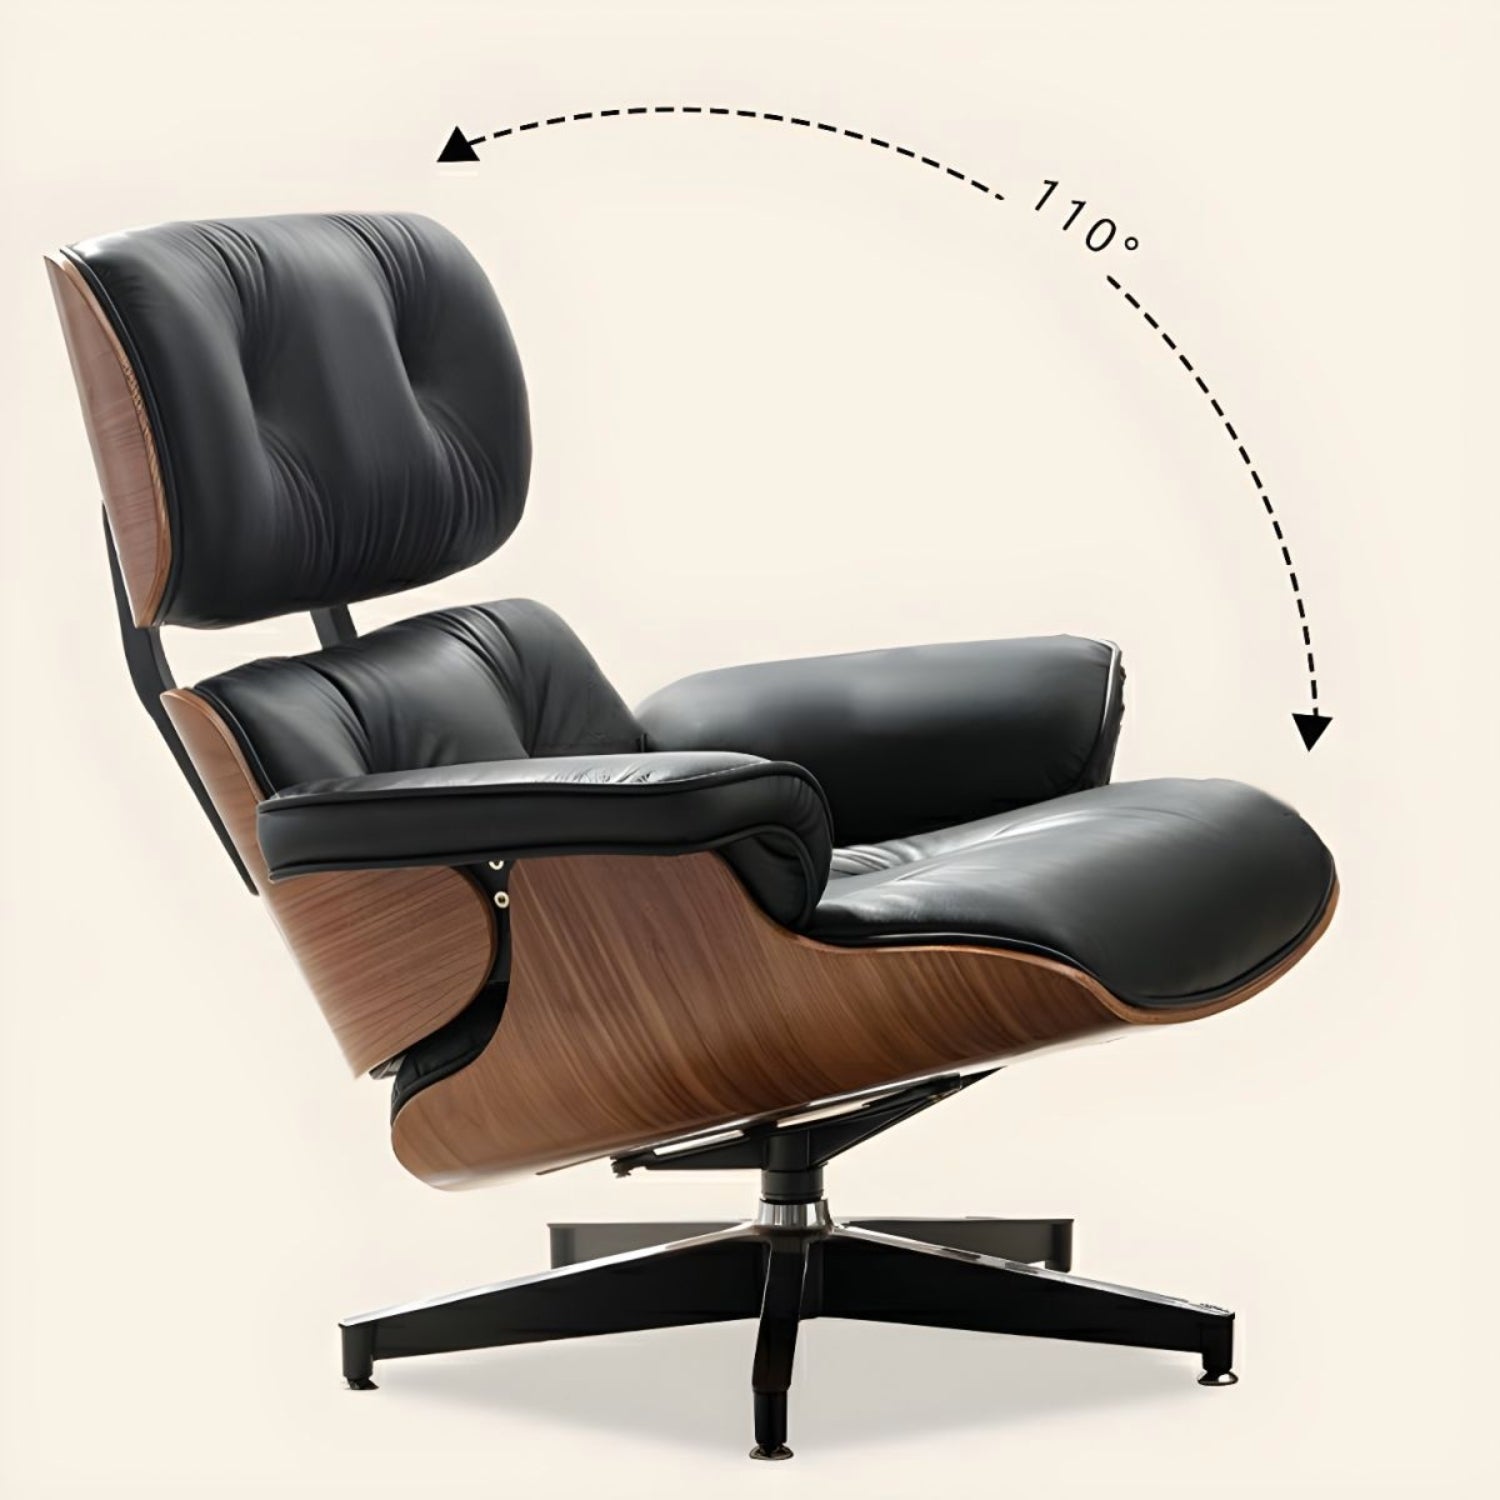 A visual representation of the iconic Eames lounge chair featuring reclining measurements for a detailed understanding.